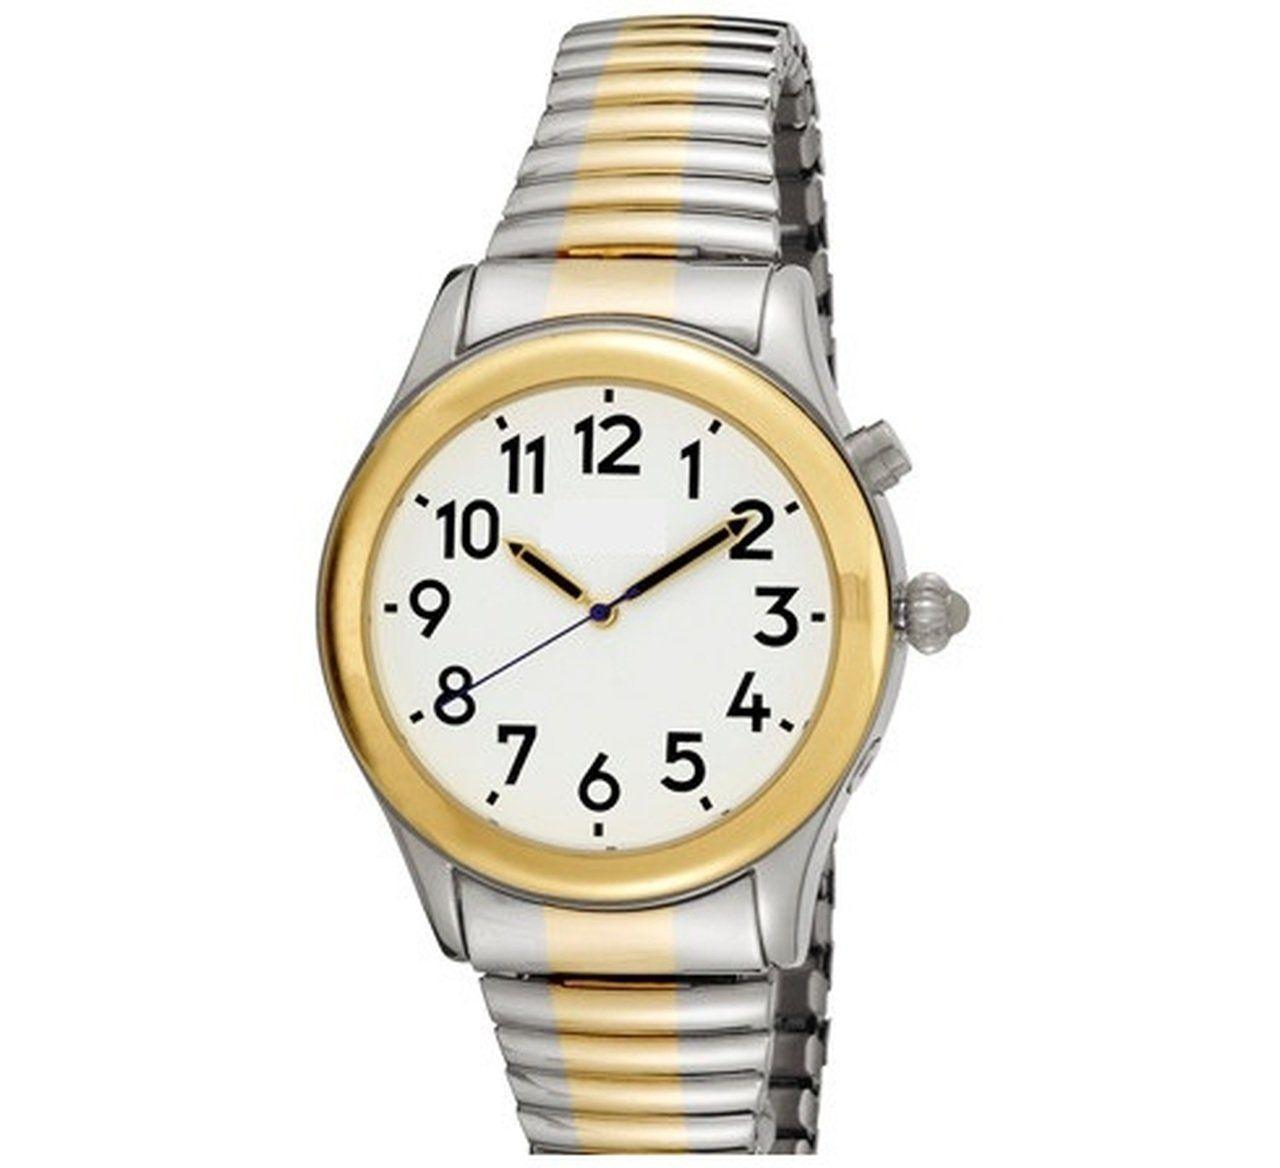 Men's two toned Talking Watch - The Low Vision Store